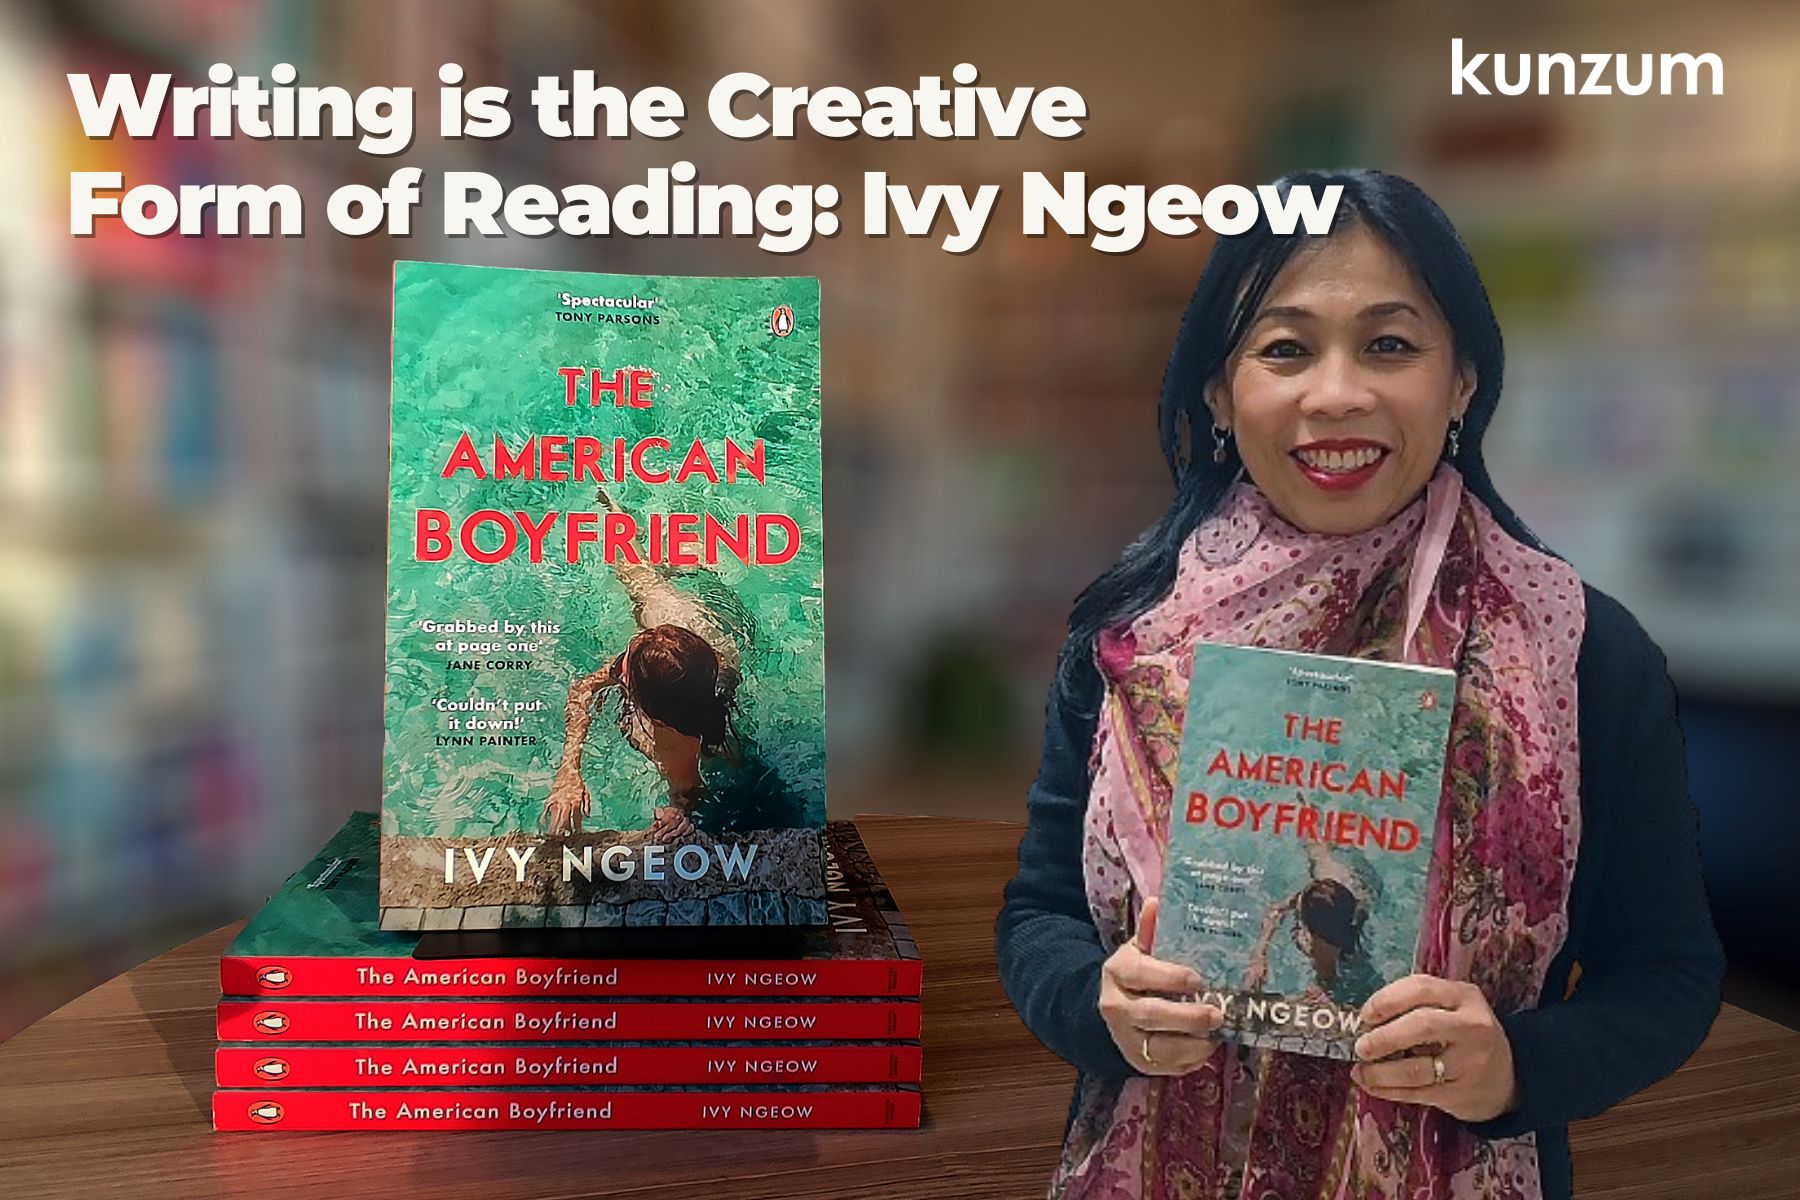 Author Interview: Writing is The Creative Side of Reading, Says Ivy Ngeow